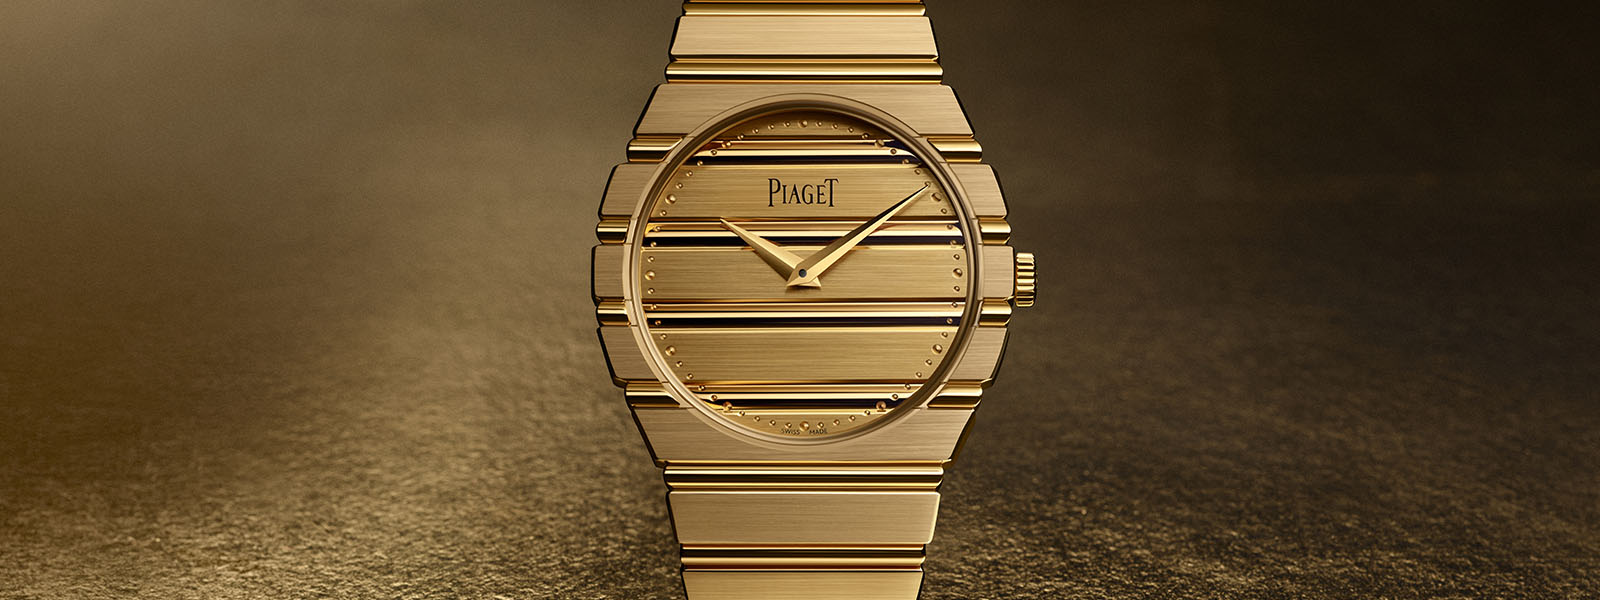 Piaget Revives The Polo 79 To Kick Off The Maison’s 150th Anniversary